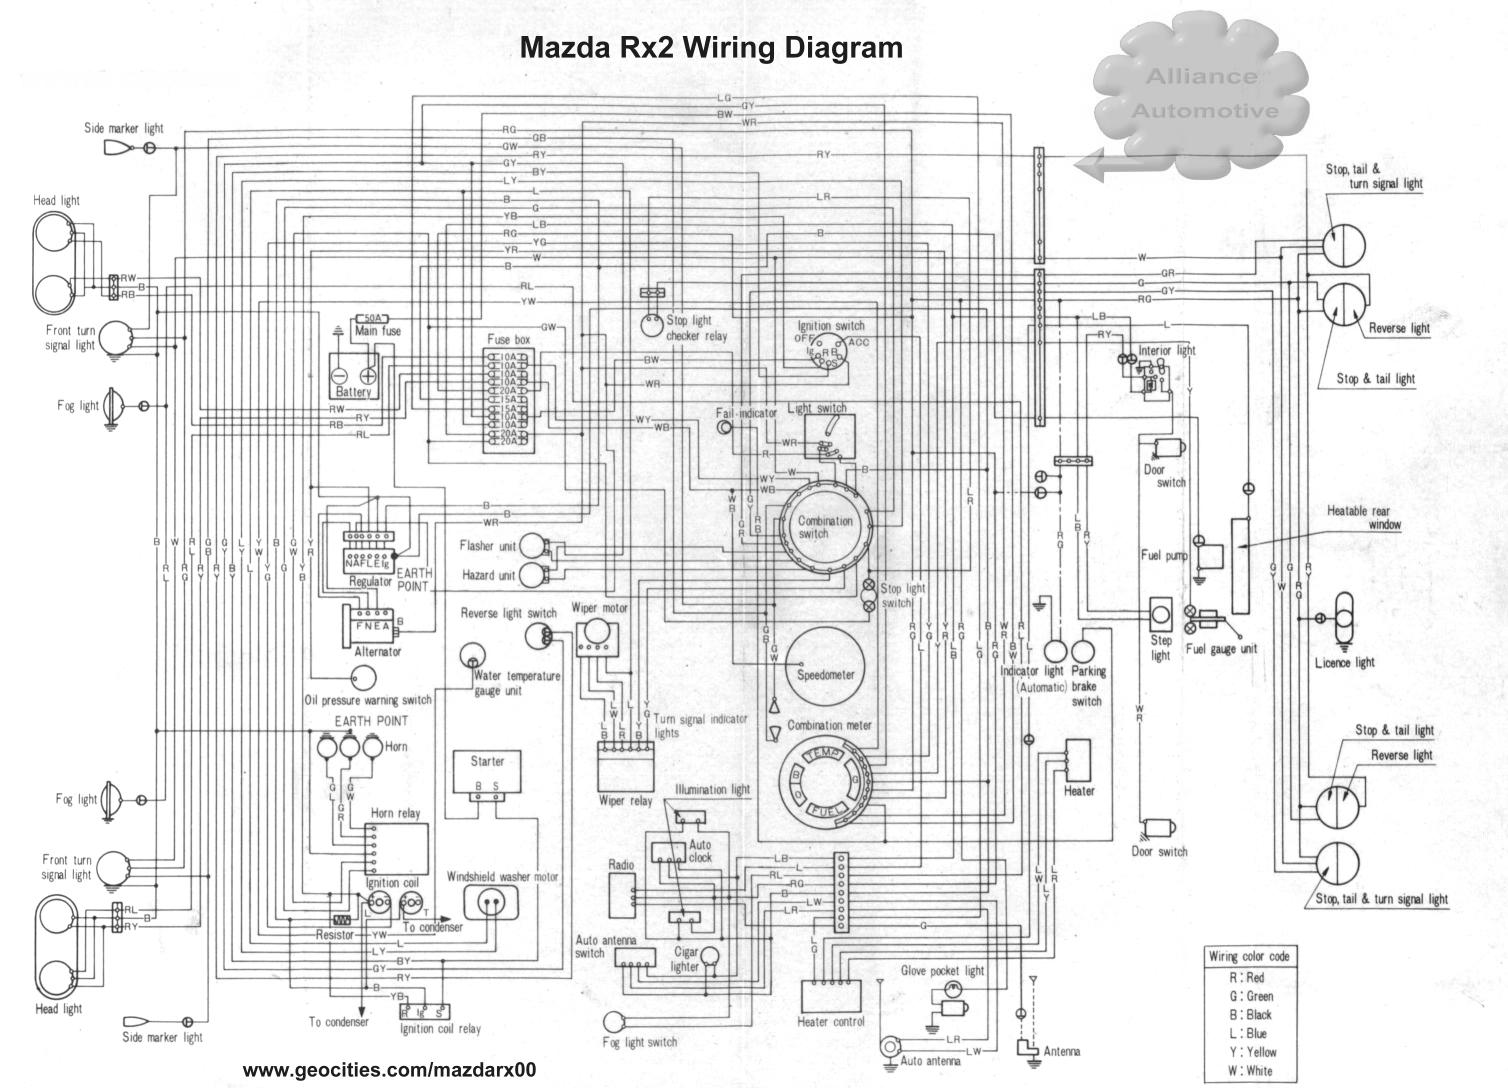 Honeywell Th9421C1004 Wiring Diagram from www.oocities.org